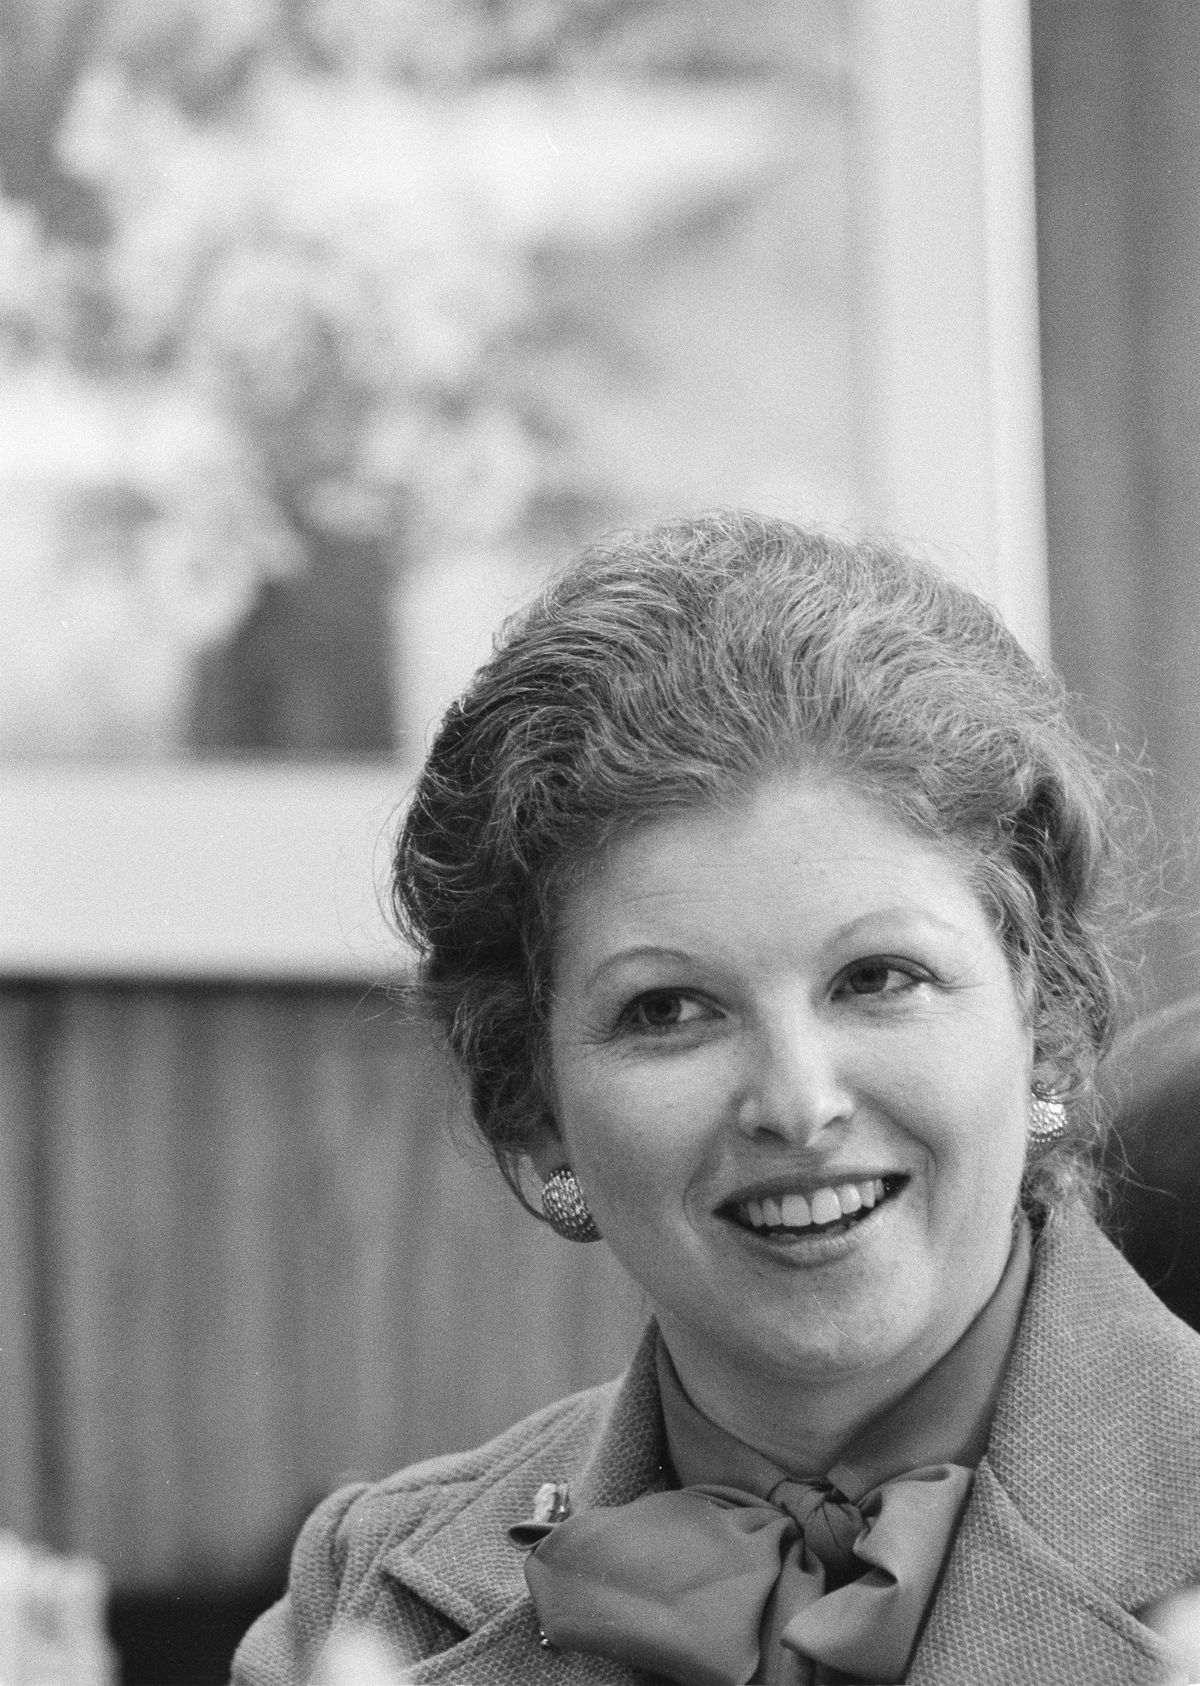 FILE - Sarah Weddington, general counsel at the Agriculture Department, smiles during an interview at her office in Washington on Aug. 31, 1978. Weddington, who at 26 successfully argued the landmark abortion rights case Roe v. Wade before the U.S. Supreme Court, died Sunday, Dec. 26, 2021. She was 76.  (Barry Thumma)